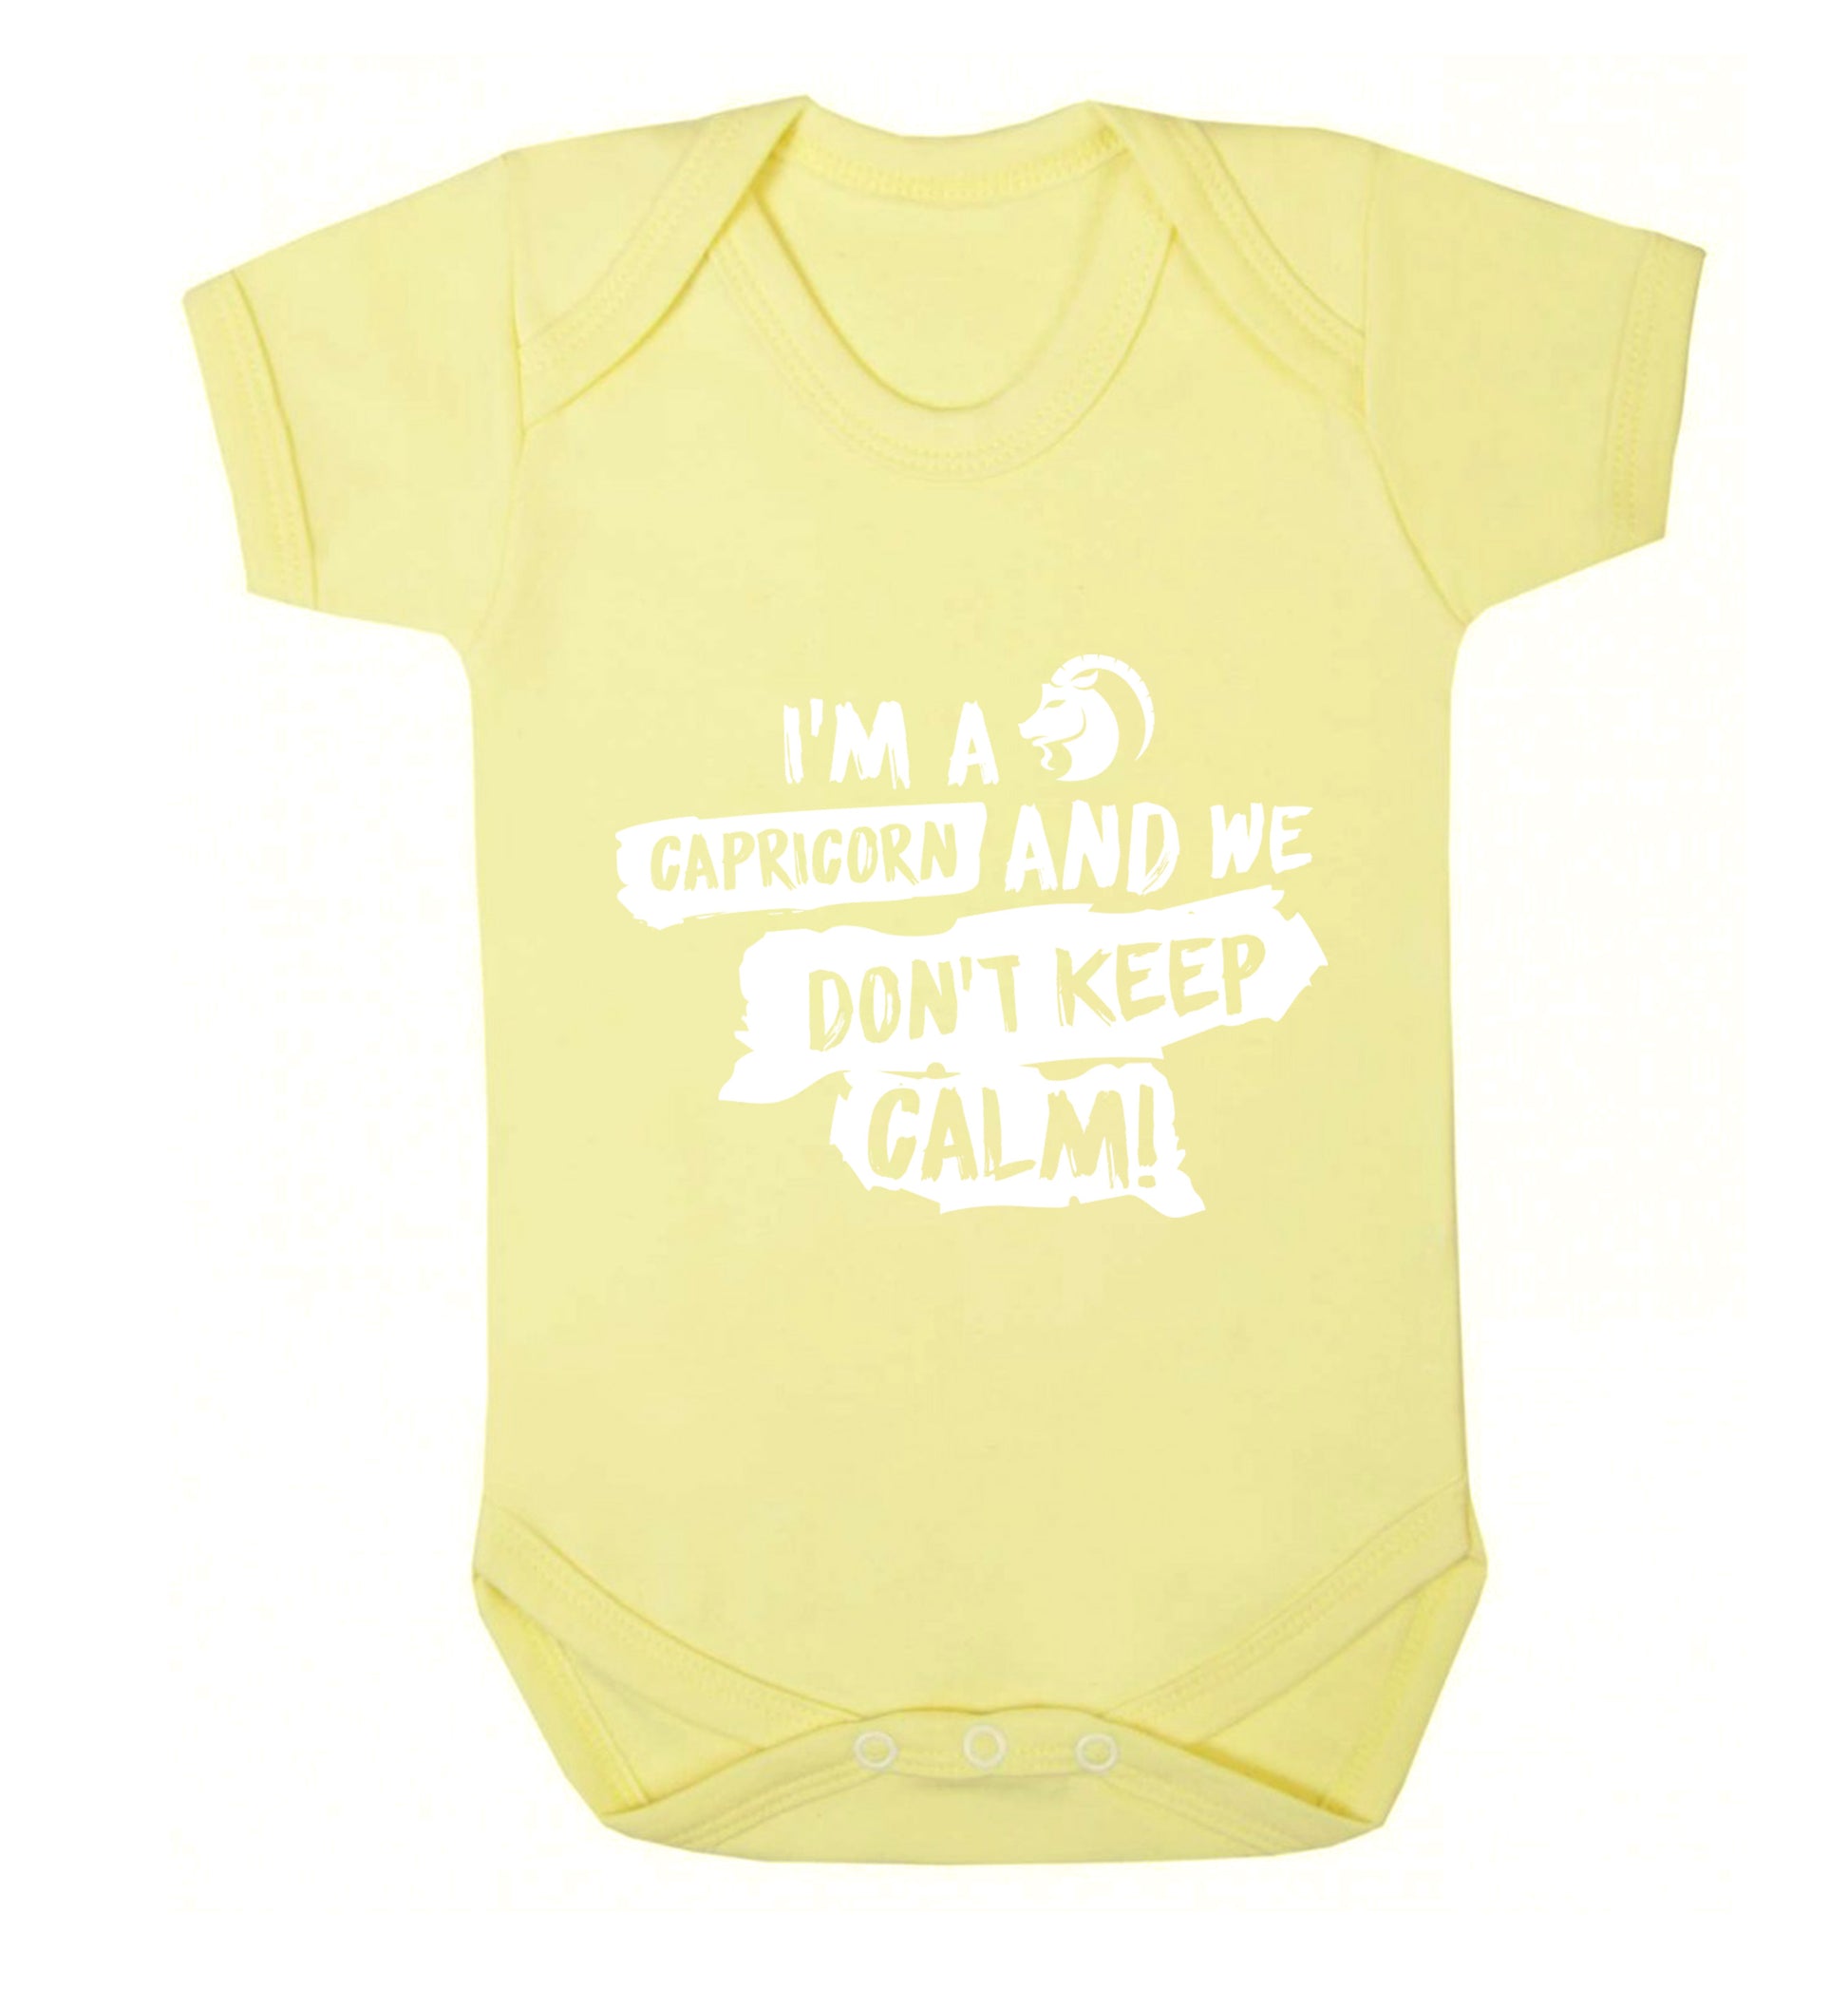 I'm a capricorn and we don't keep calm Baby Vest pale yellow 18-24 months